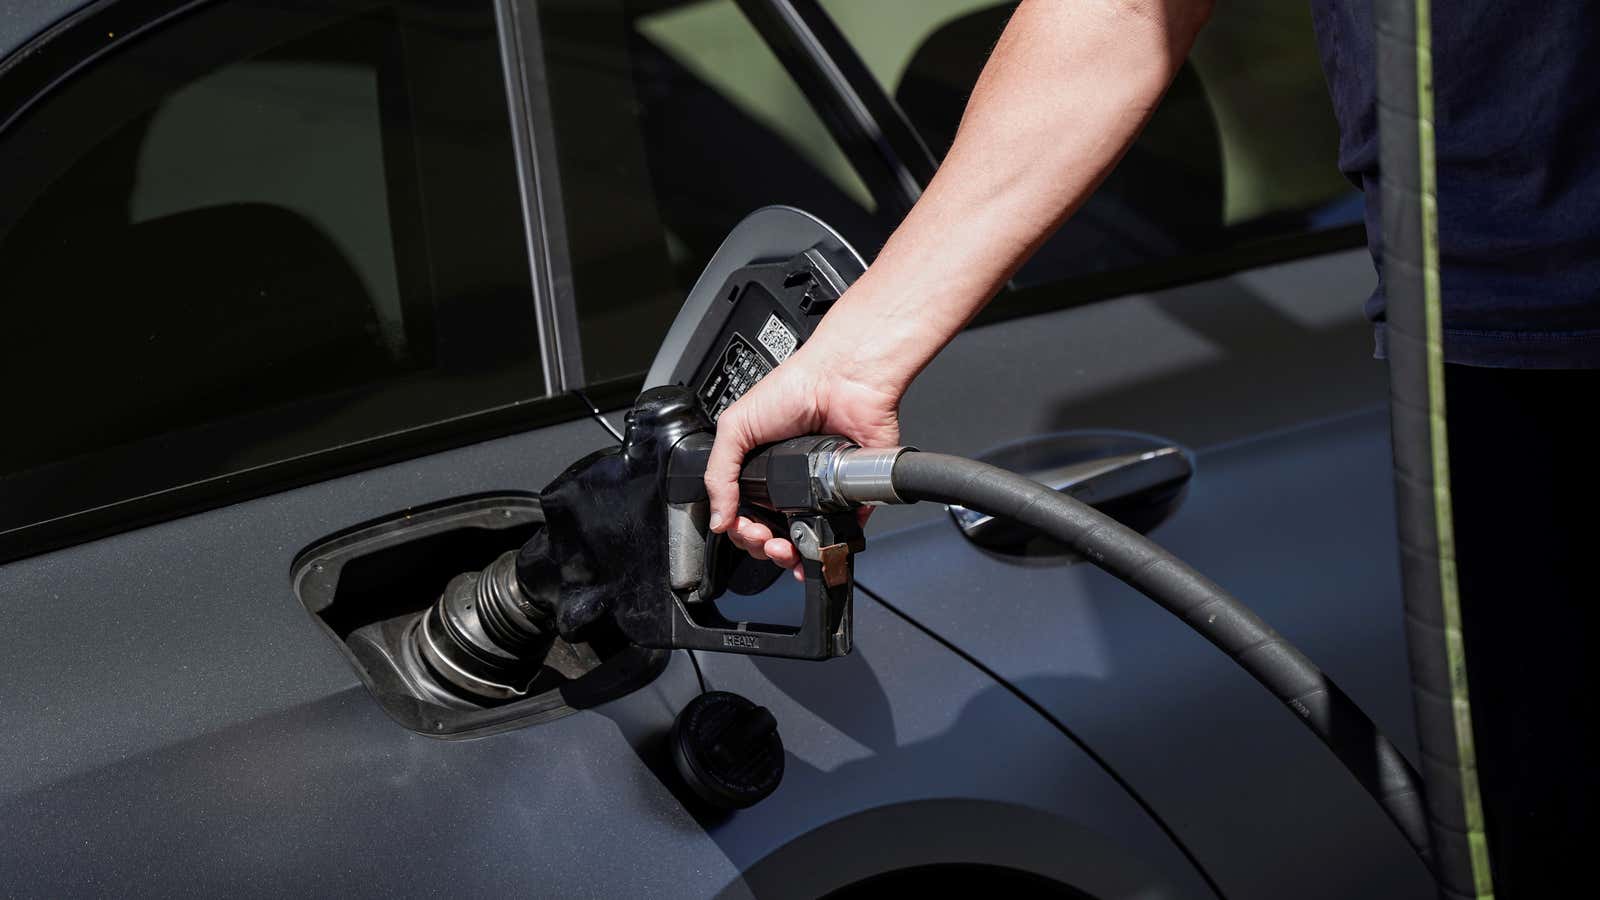 A customer refuels their vehicle at a Mobil gas station in Beverly Boulevard in West Hollywood, California, U.S., March 10, 2022. Picture taken March 10, 2022.